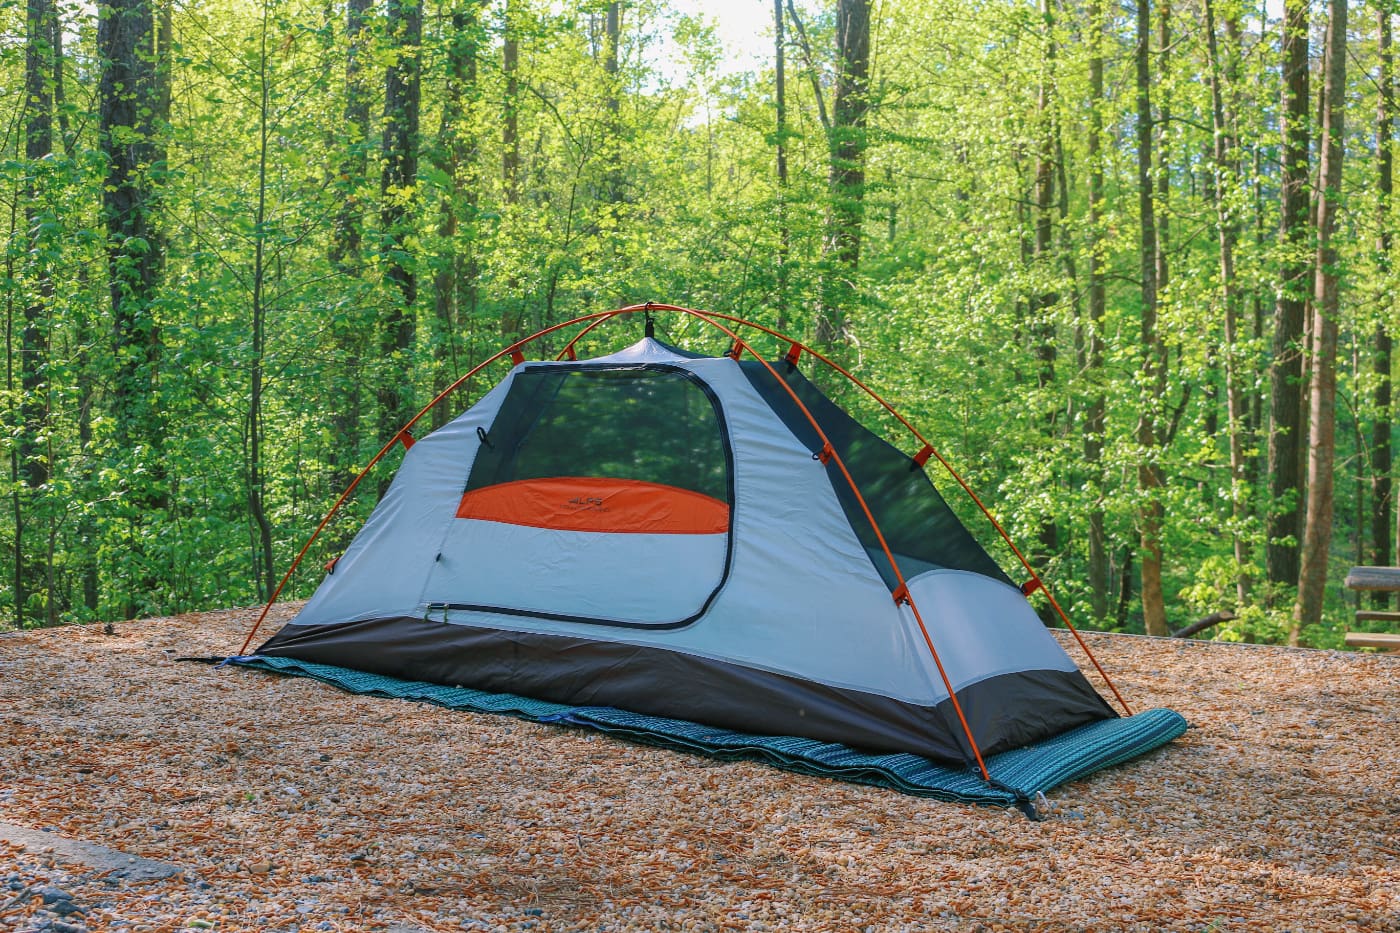 Orange and grey tent setup on the ground in front of a young and leafy cluster of trees.